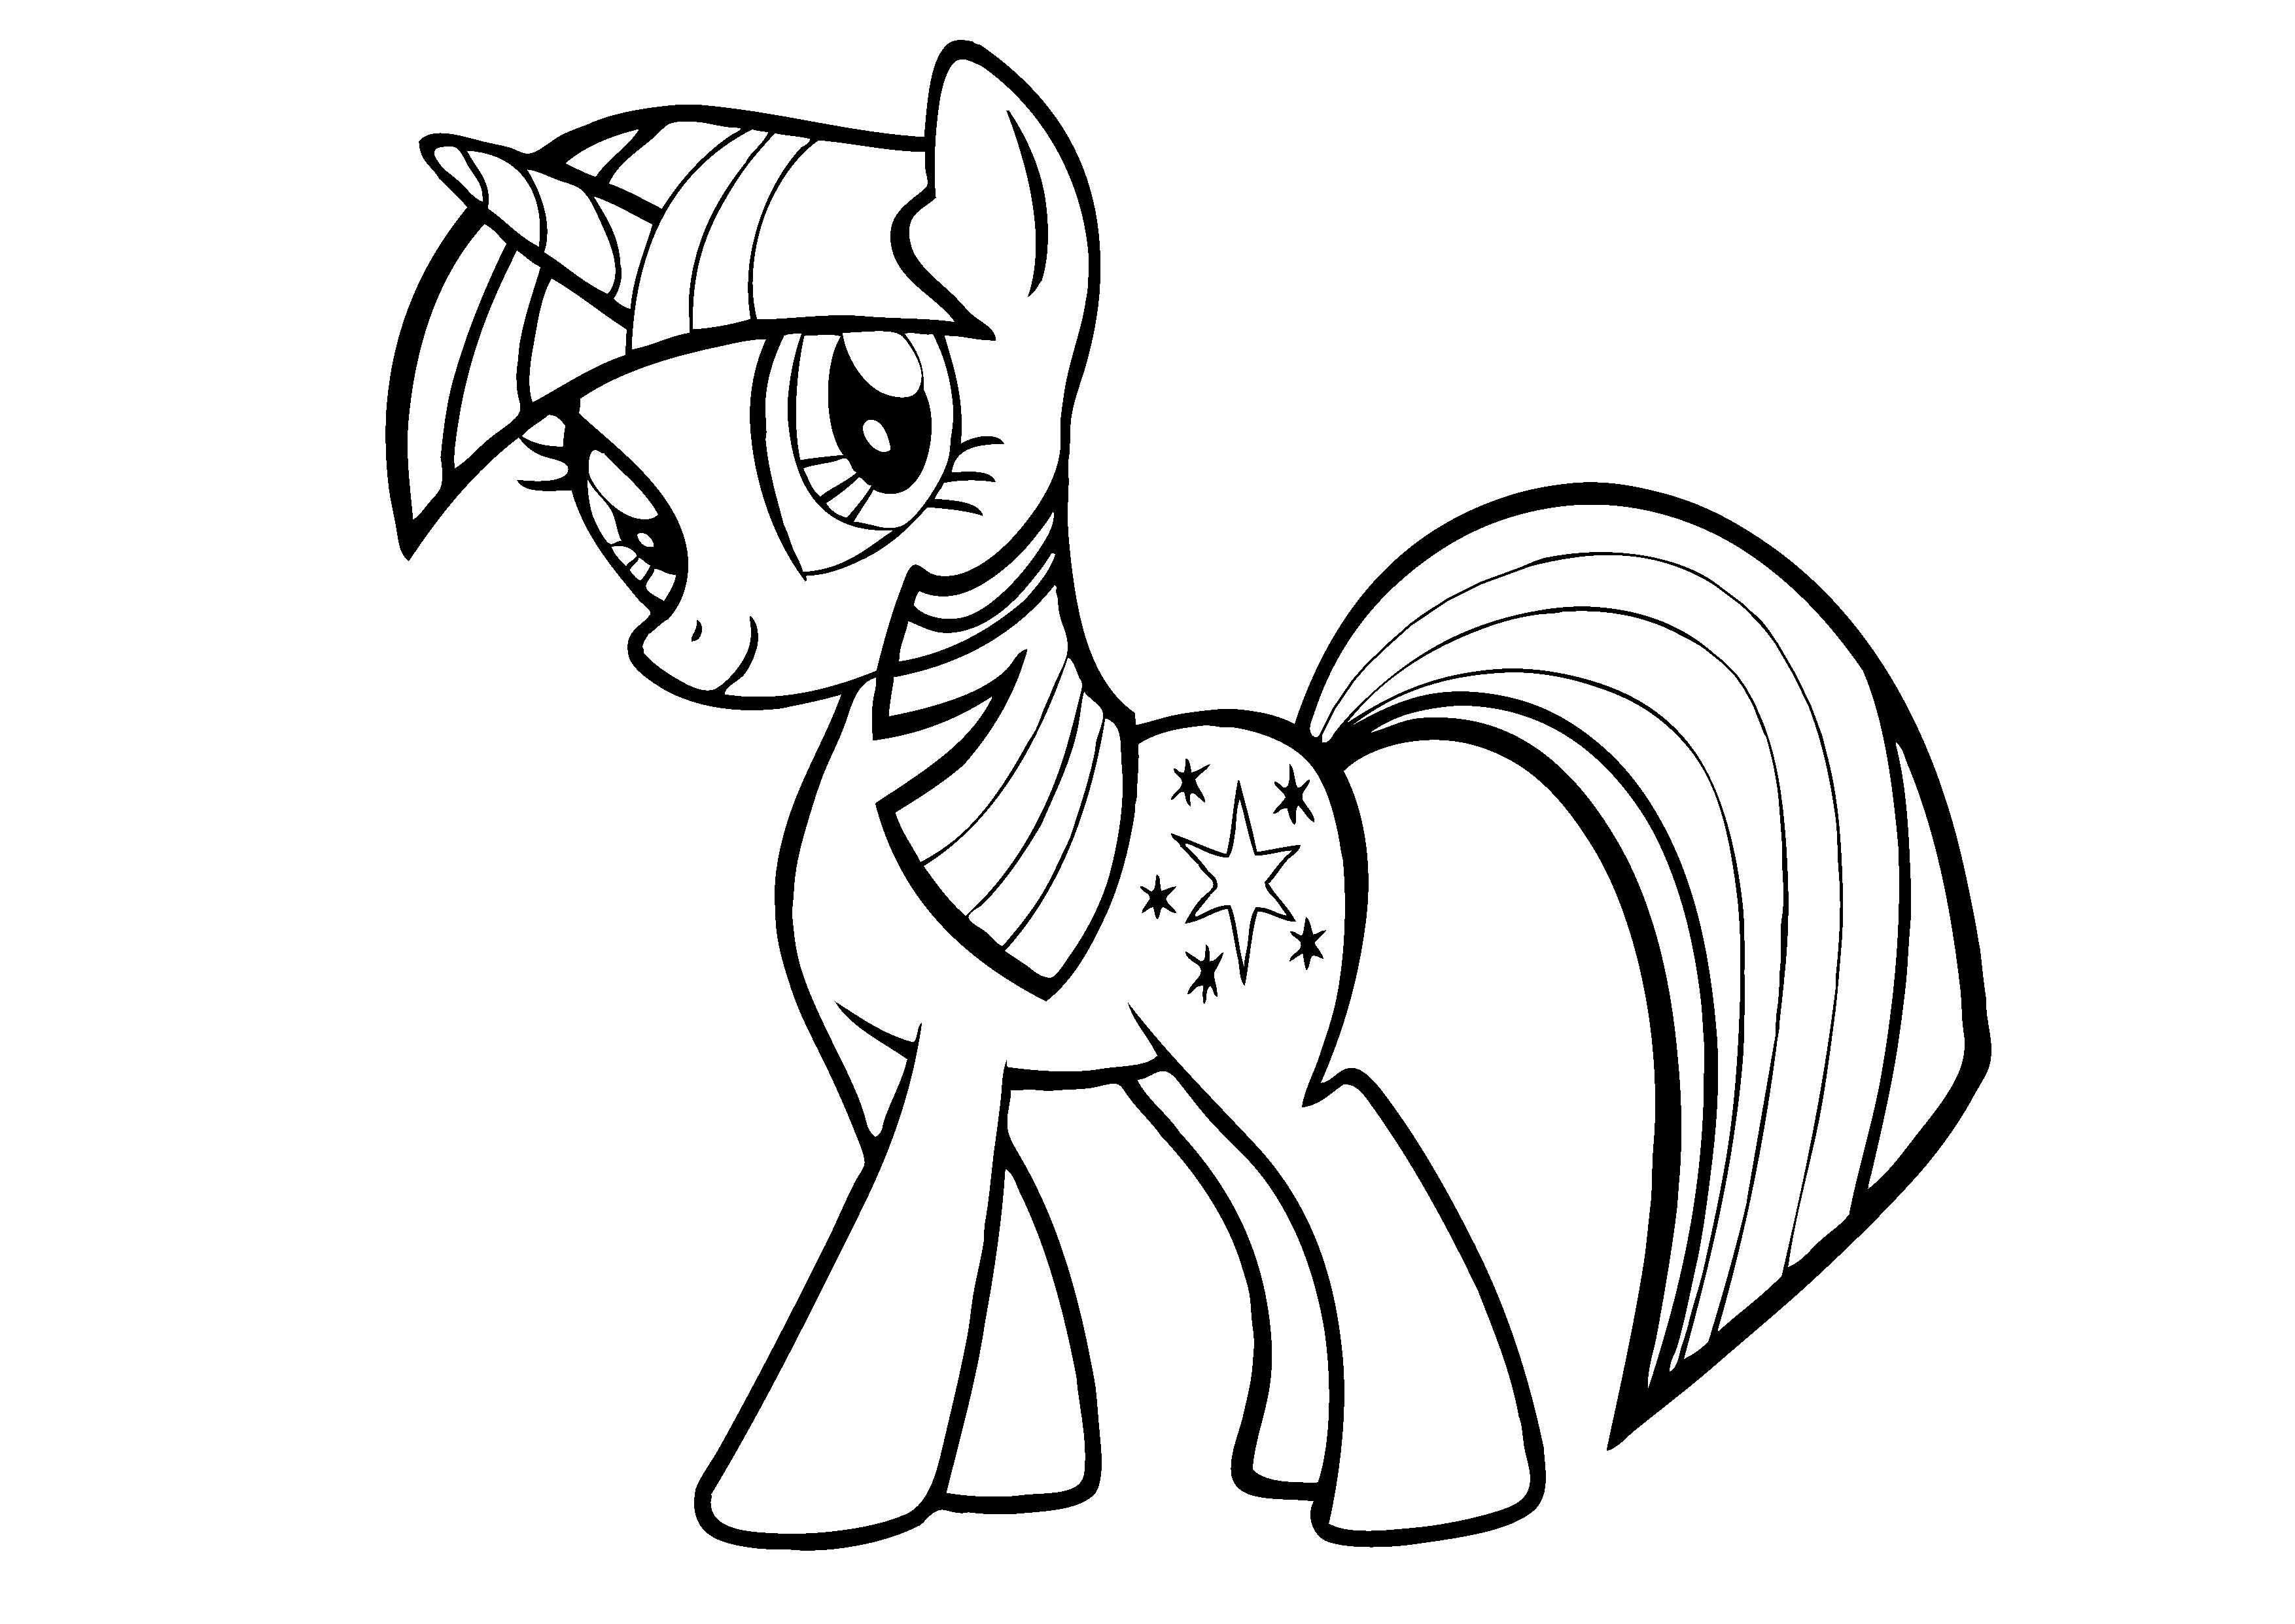 Free Printable My Little Pony Coloring Pages For Kids - Free Printable My Little Pony Coloring Pages